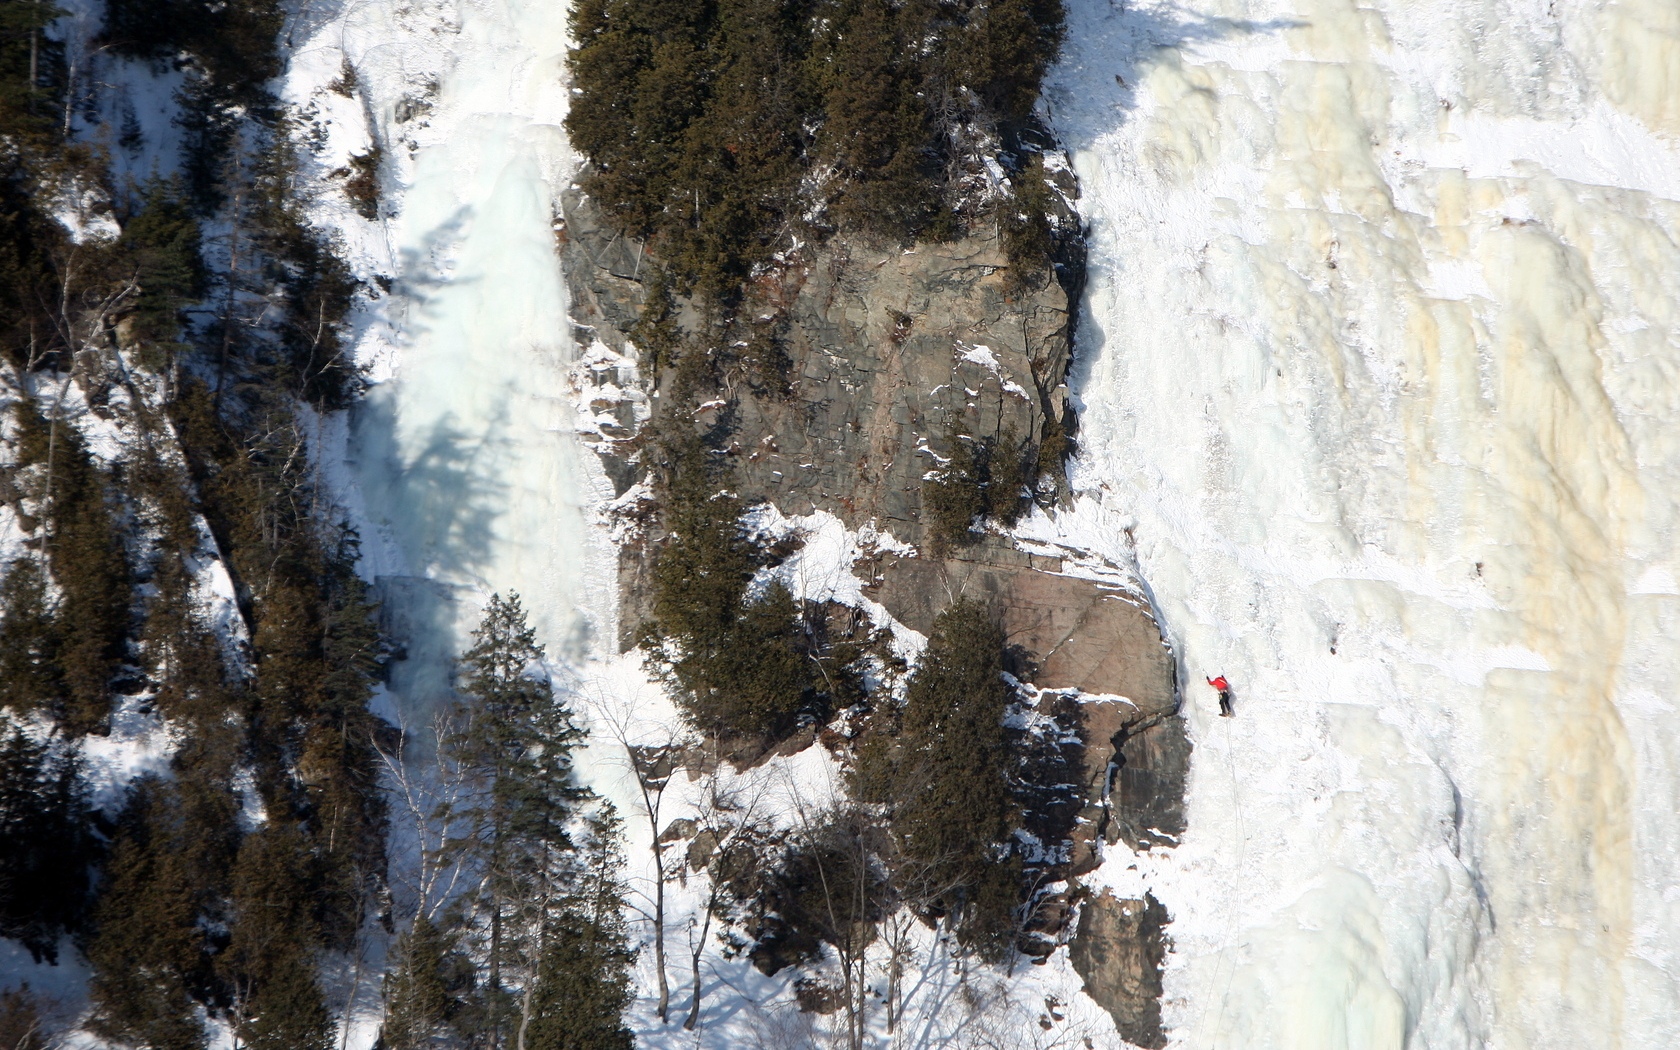 Download HQ Alpinist On Iced Montmorency Falls, Canada Waterfalls wallpaper / 1680x1050